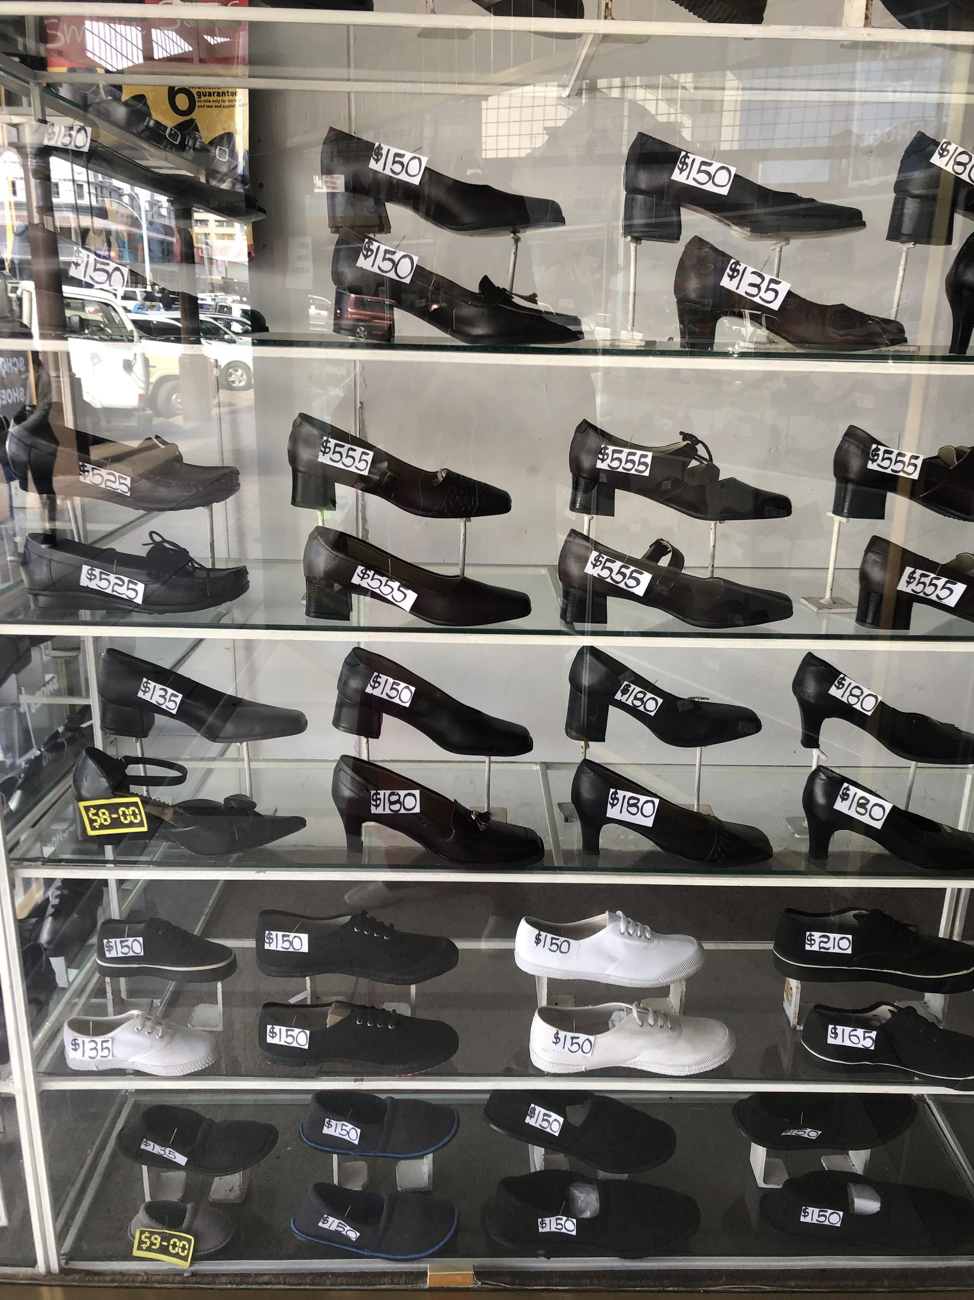 A shoe store in Bulawayo displays new prices in Zi